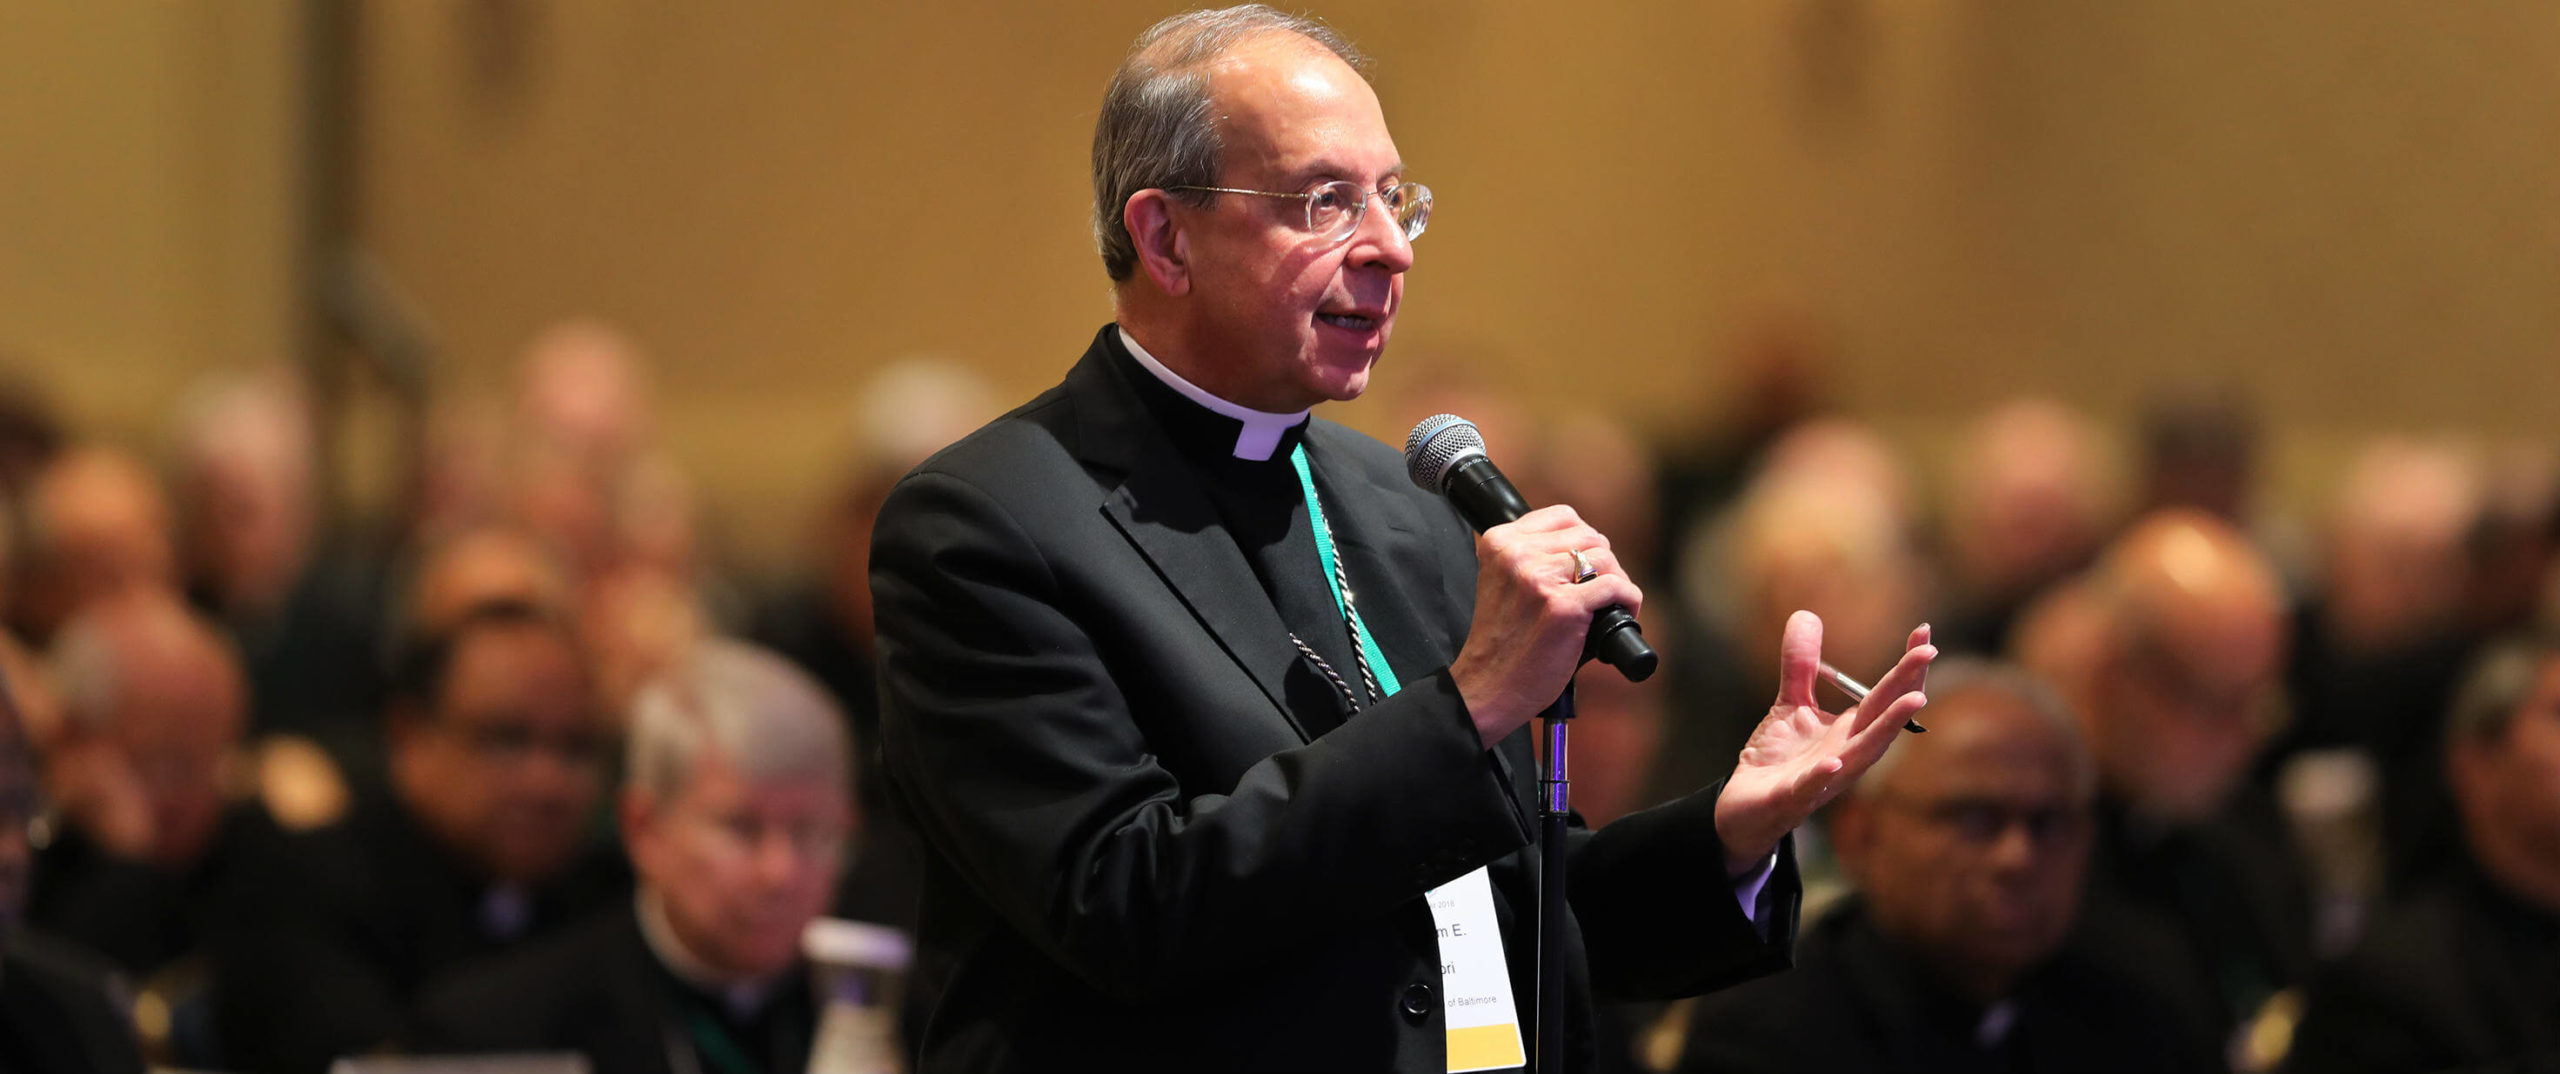 Archbishop Lori reflects on completed bishops’ meeting